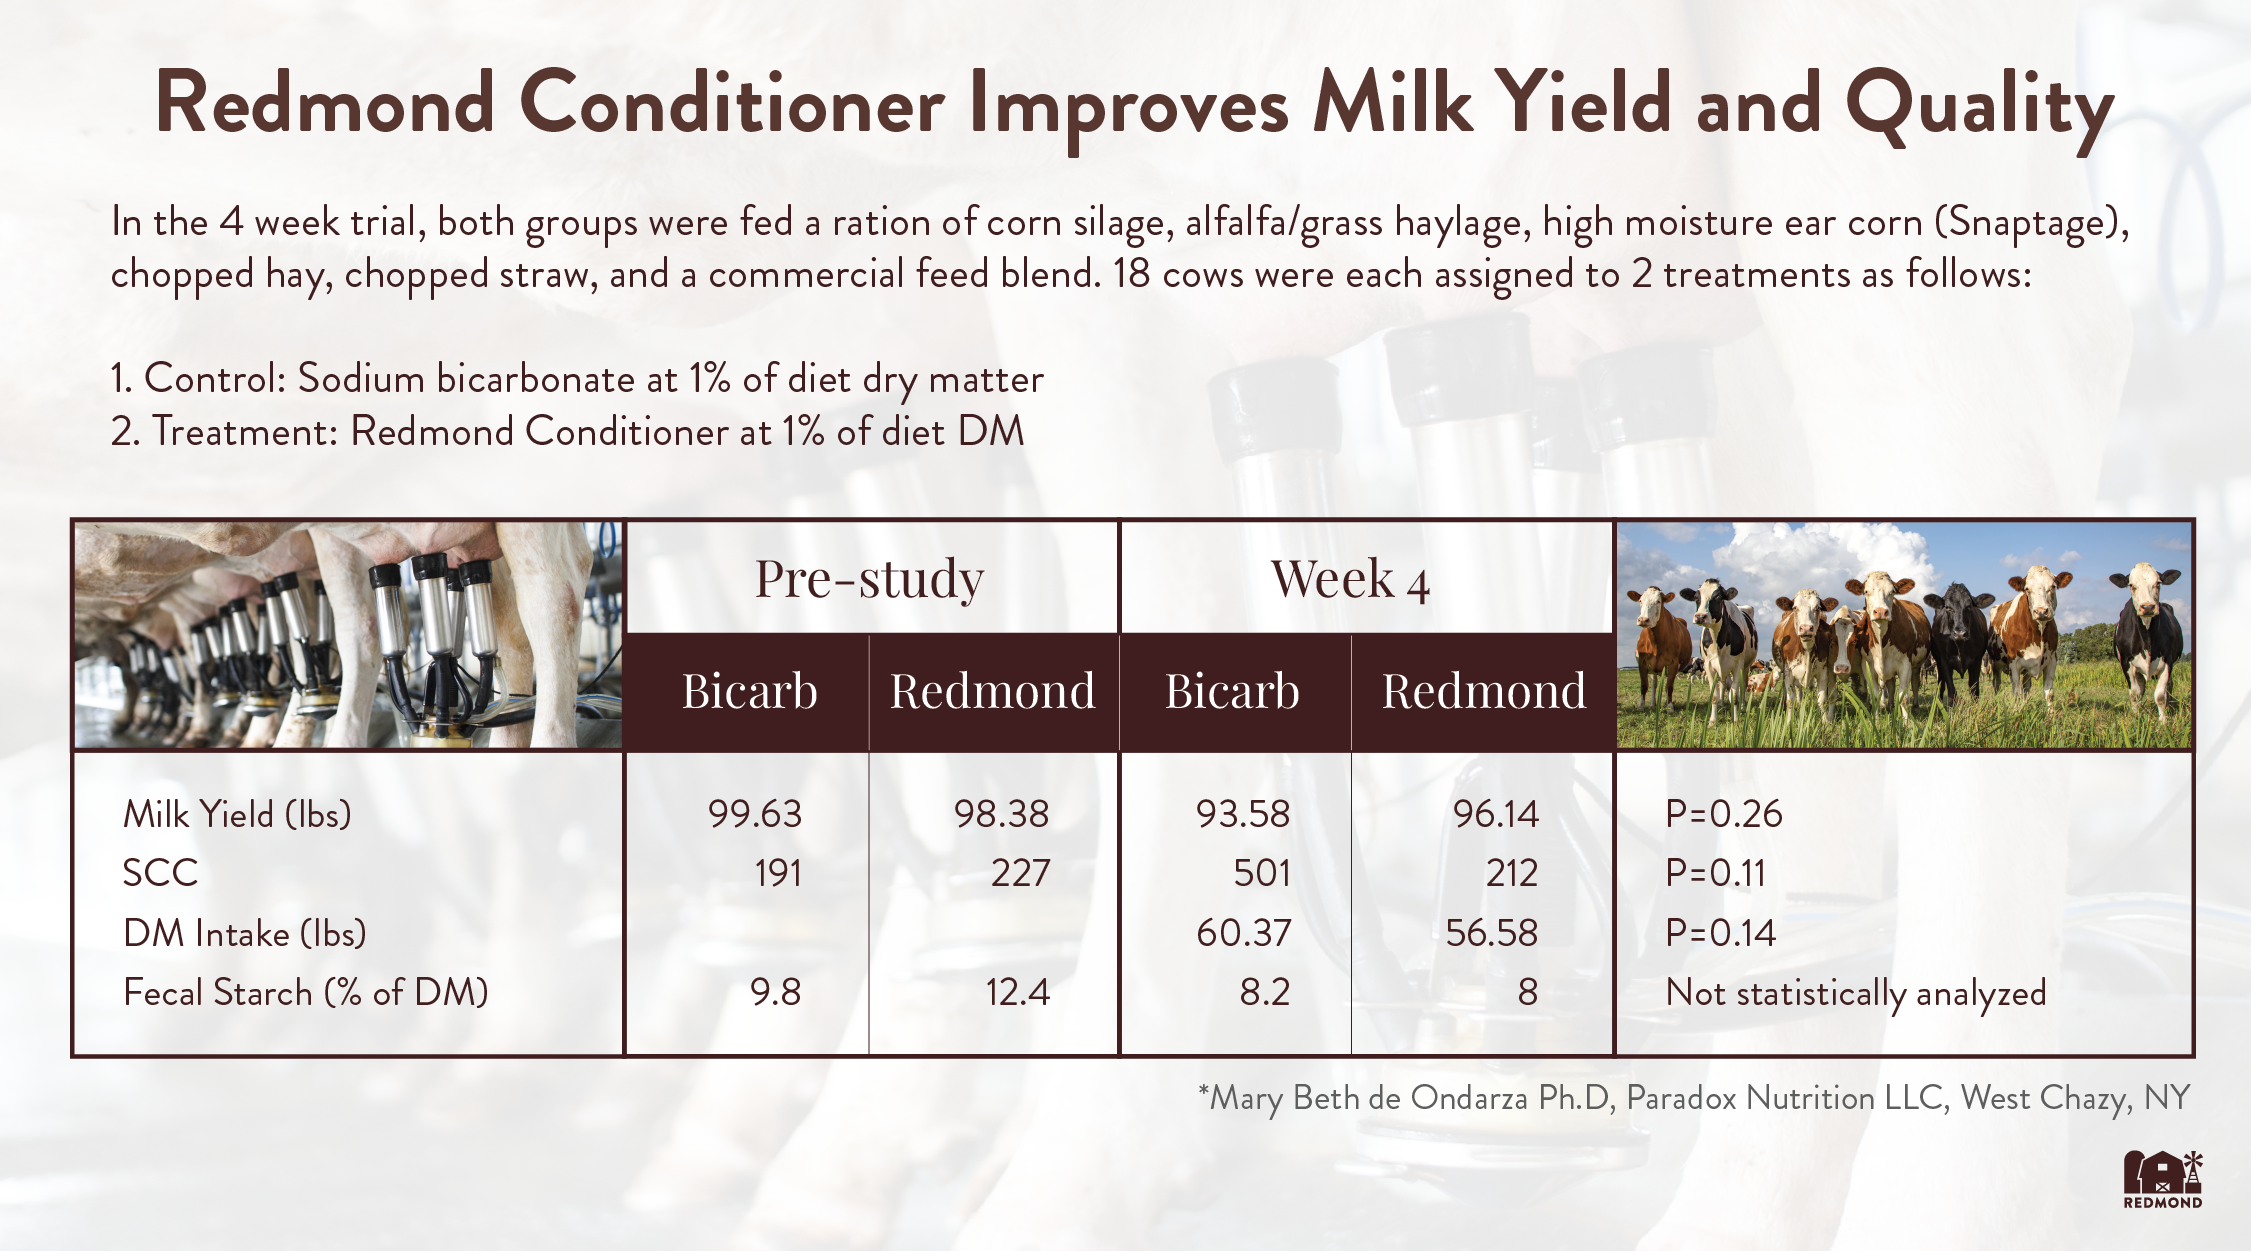 Redmond improves milk yield and quality